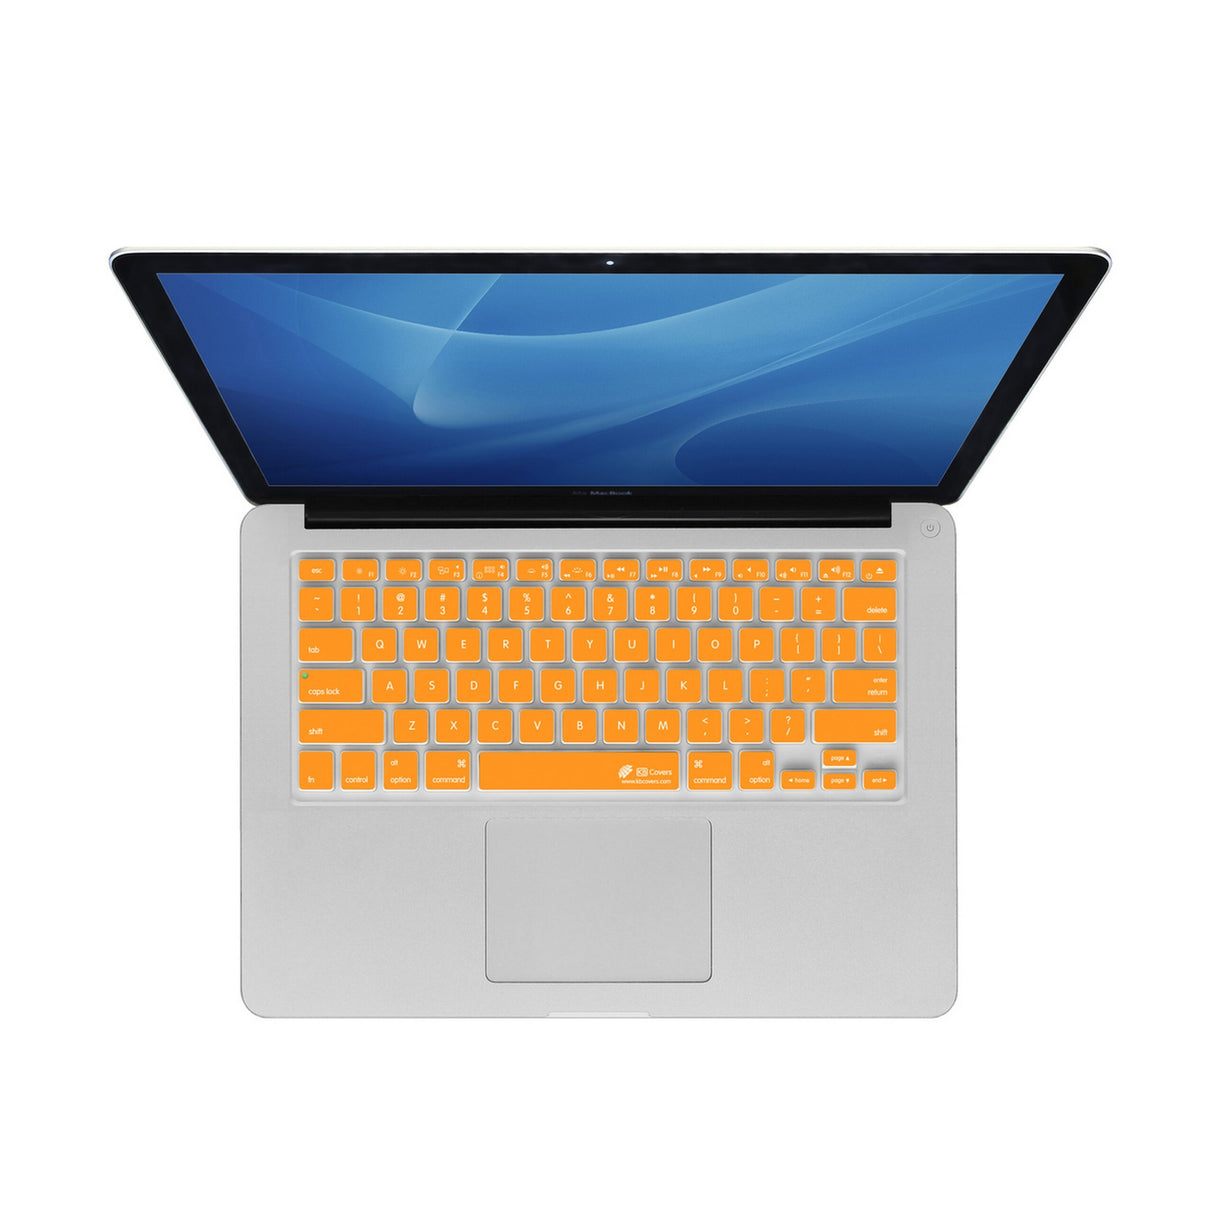 KB Covers CB-M-Orange Orange Keyboard Cover for MacBook/Air 13/Pro 2008+/Retina and Wireless (Used)